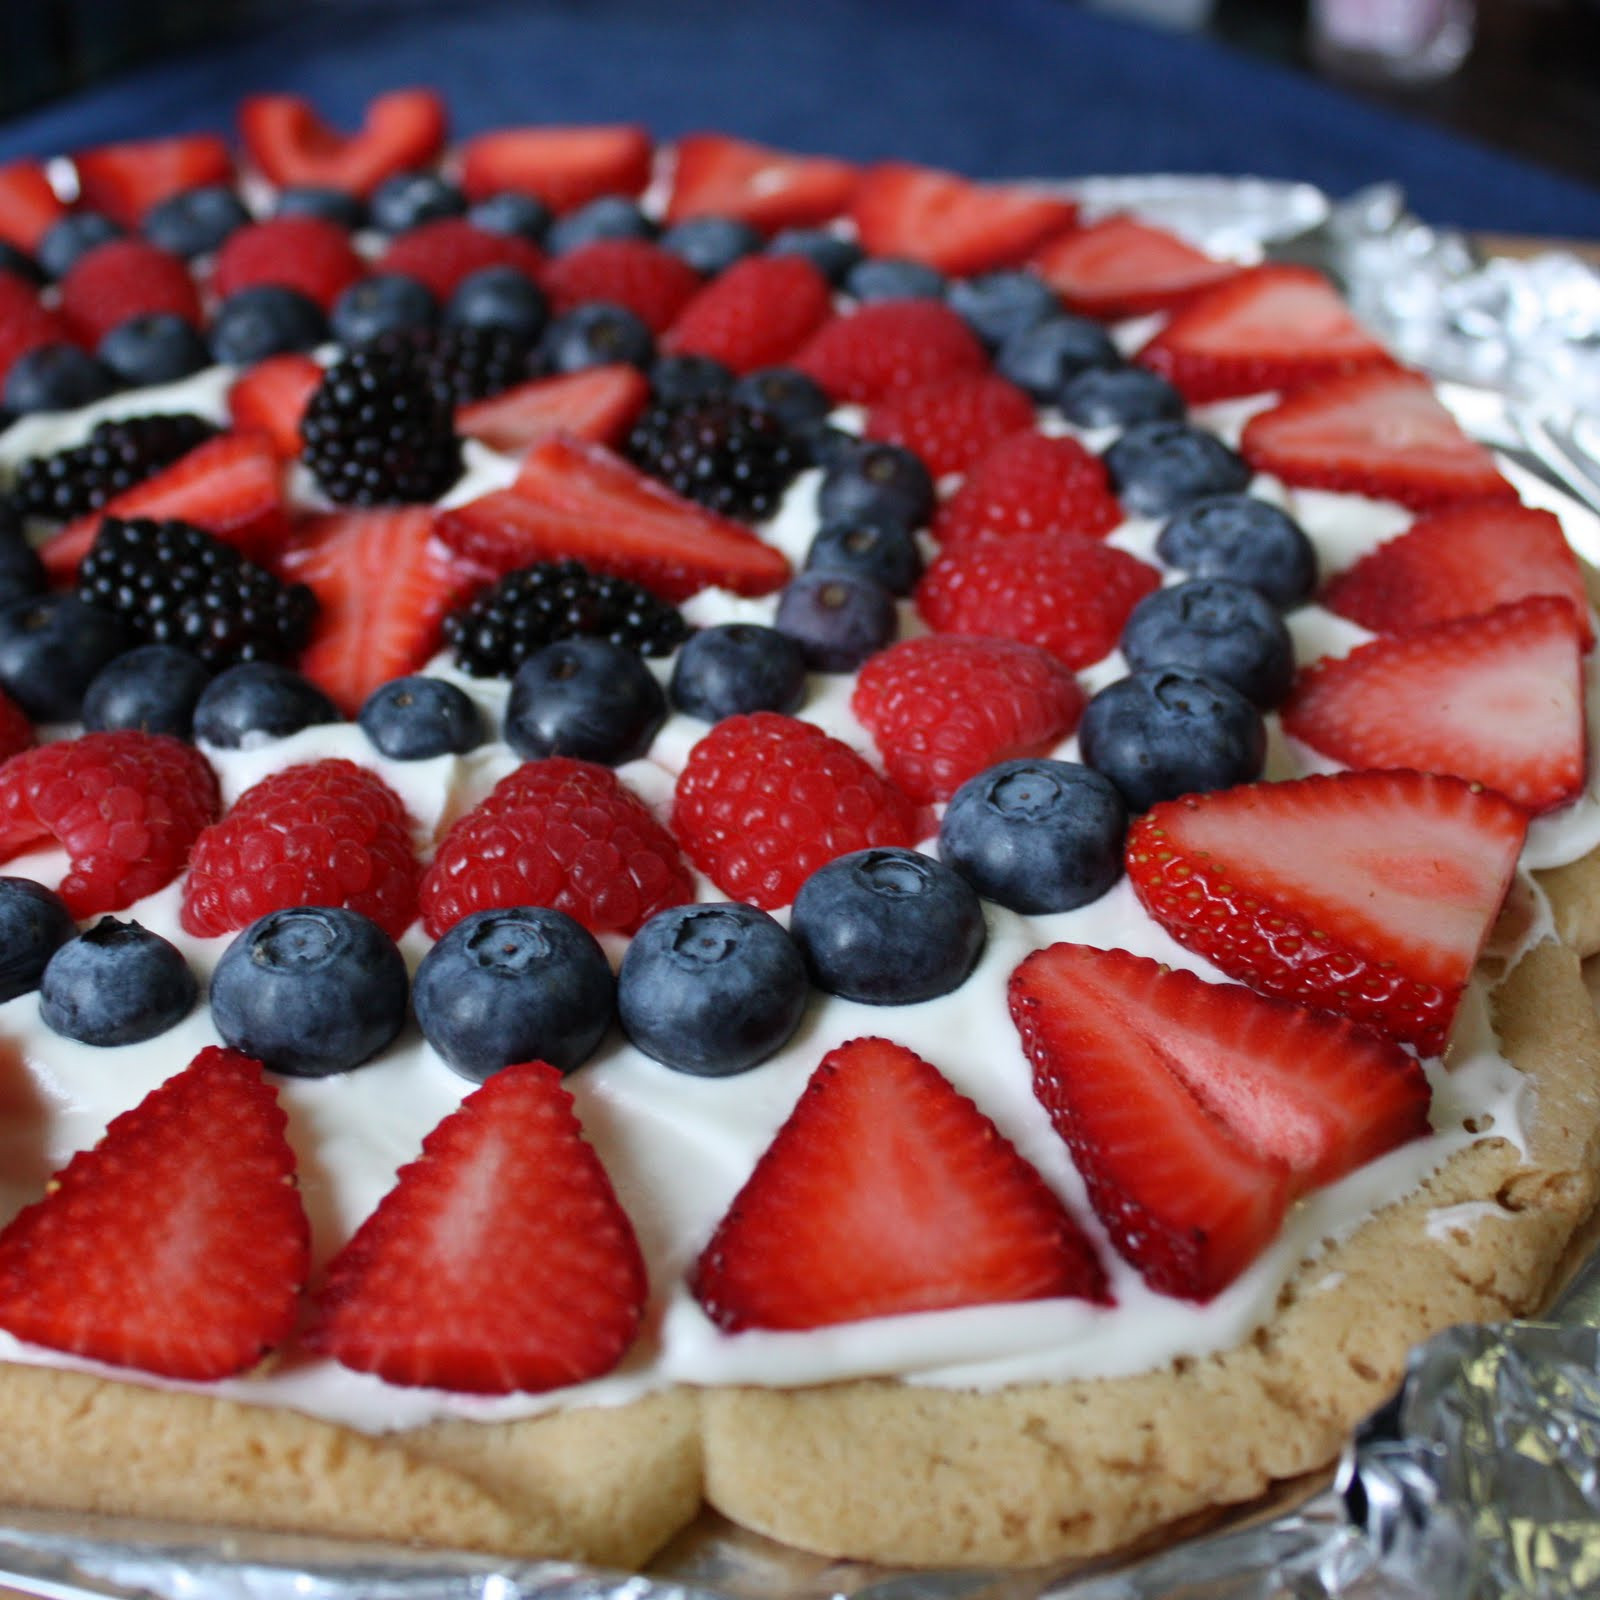 4Th Of July Fruit Desserts
 My 4th of July Staple Red White and Blue Fruit Cookie